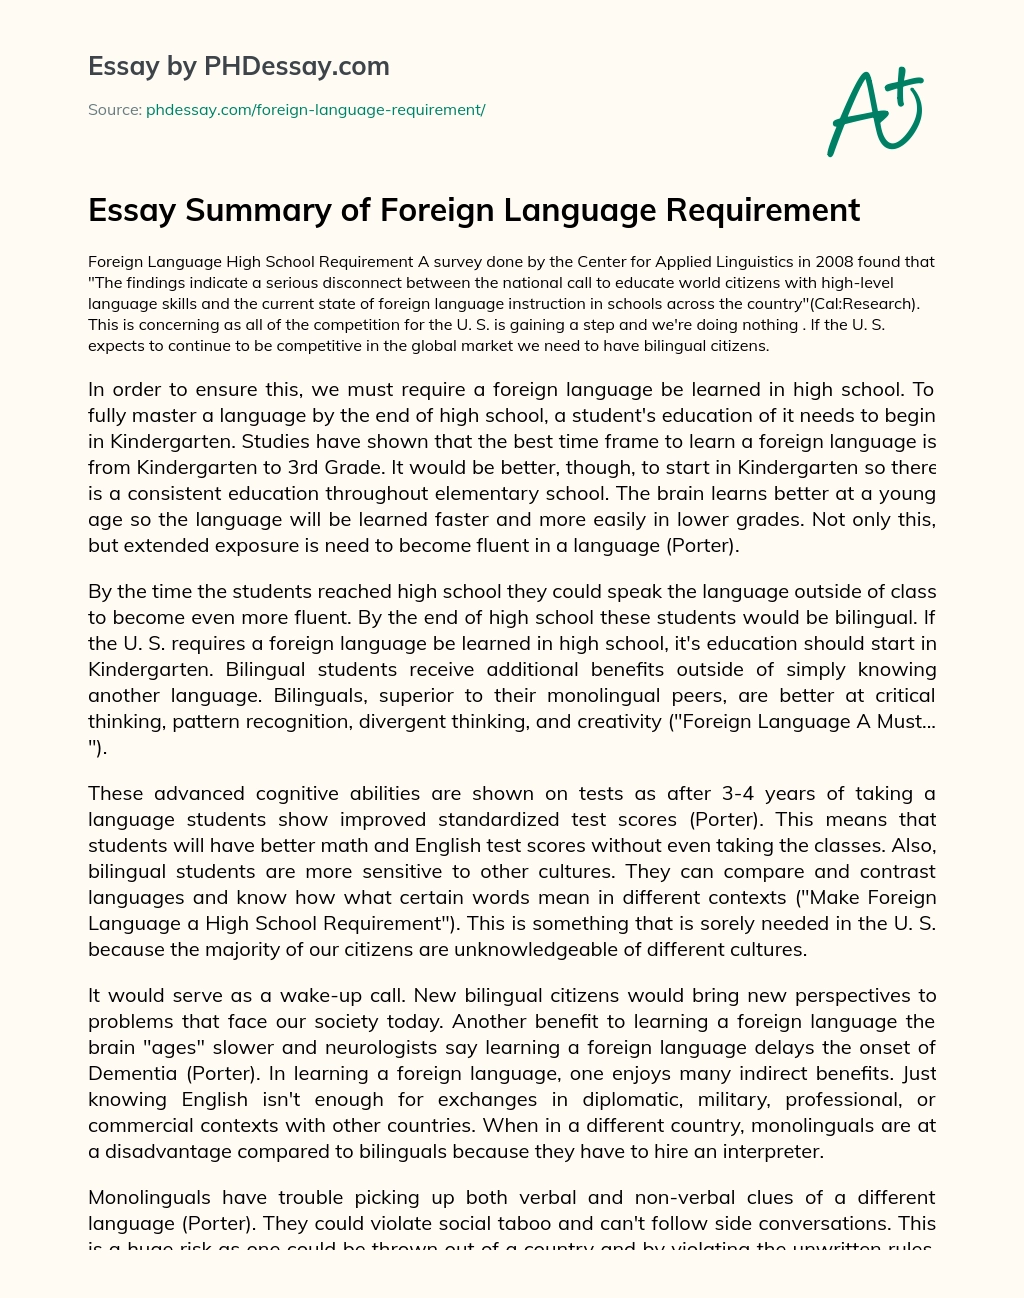 importance of learning a second language essay